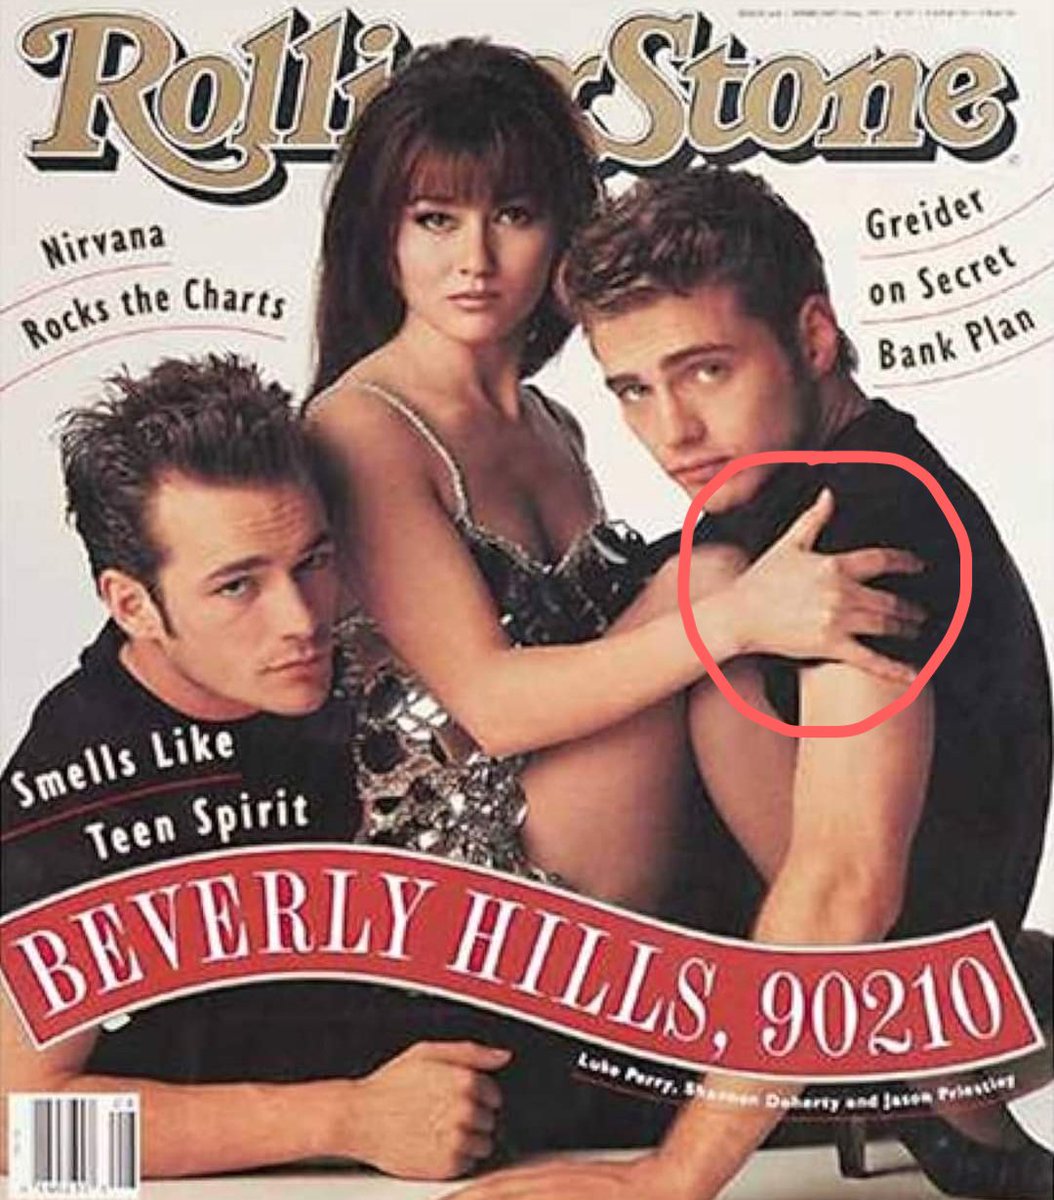 Do you know what the hand sign means? What else do you see?
#beverlyhills90210 #jasonpriestly #shannendougherty #lukeperry